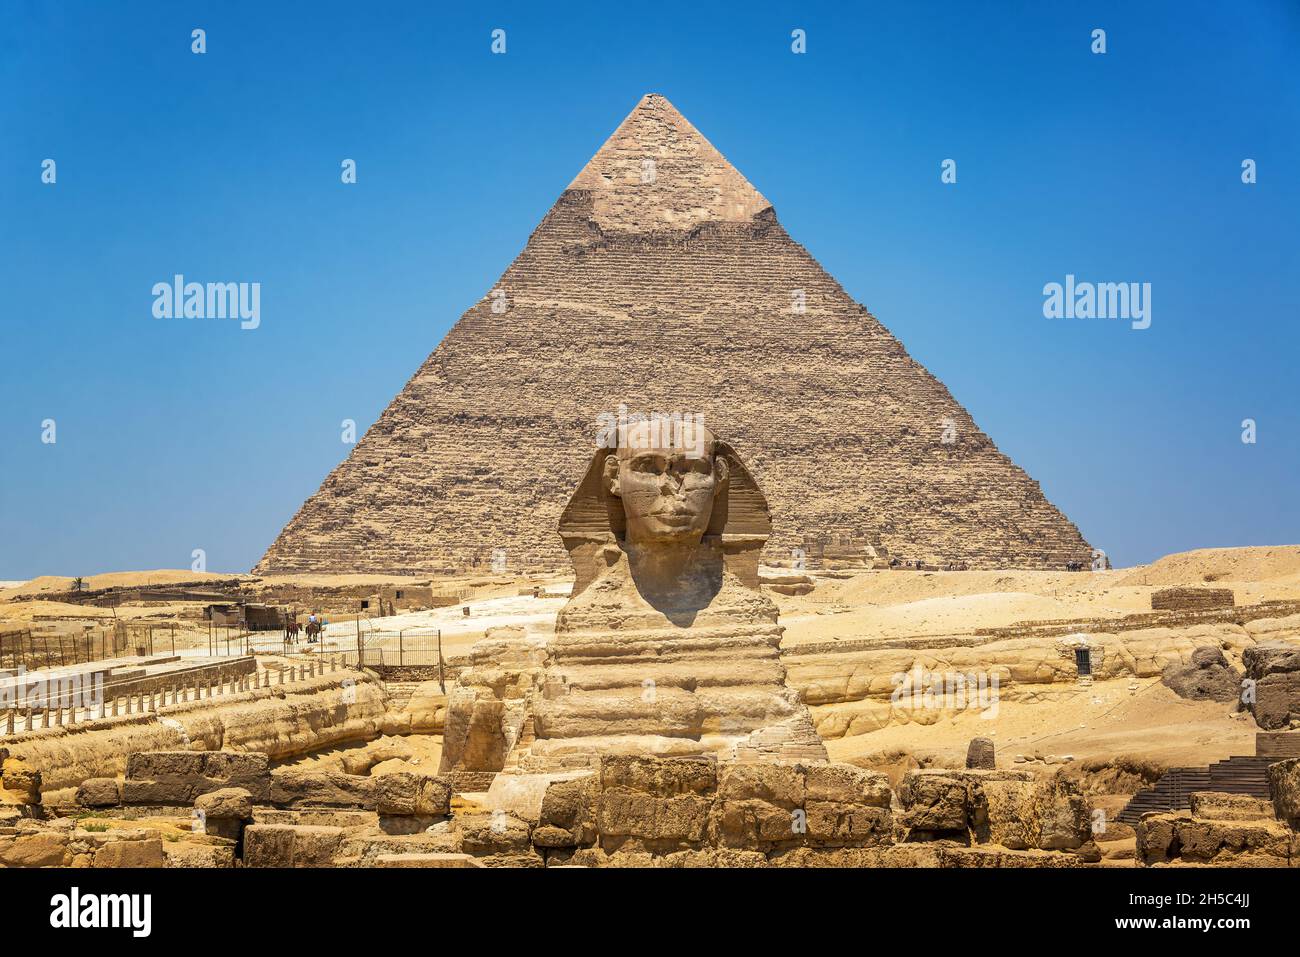 View of the Great Sphinx and Second Pyramid at the Giza Pyramid Complex in Egypt Stock Photo